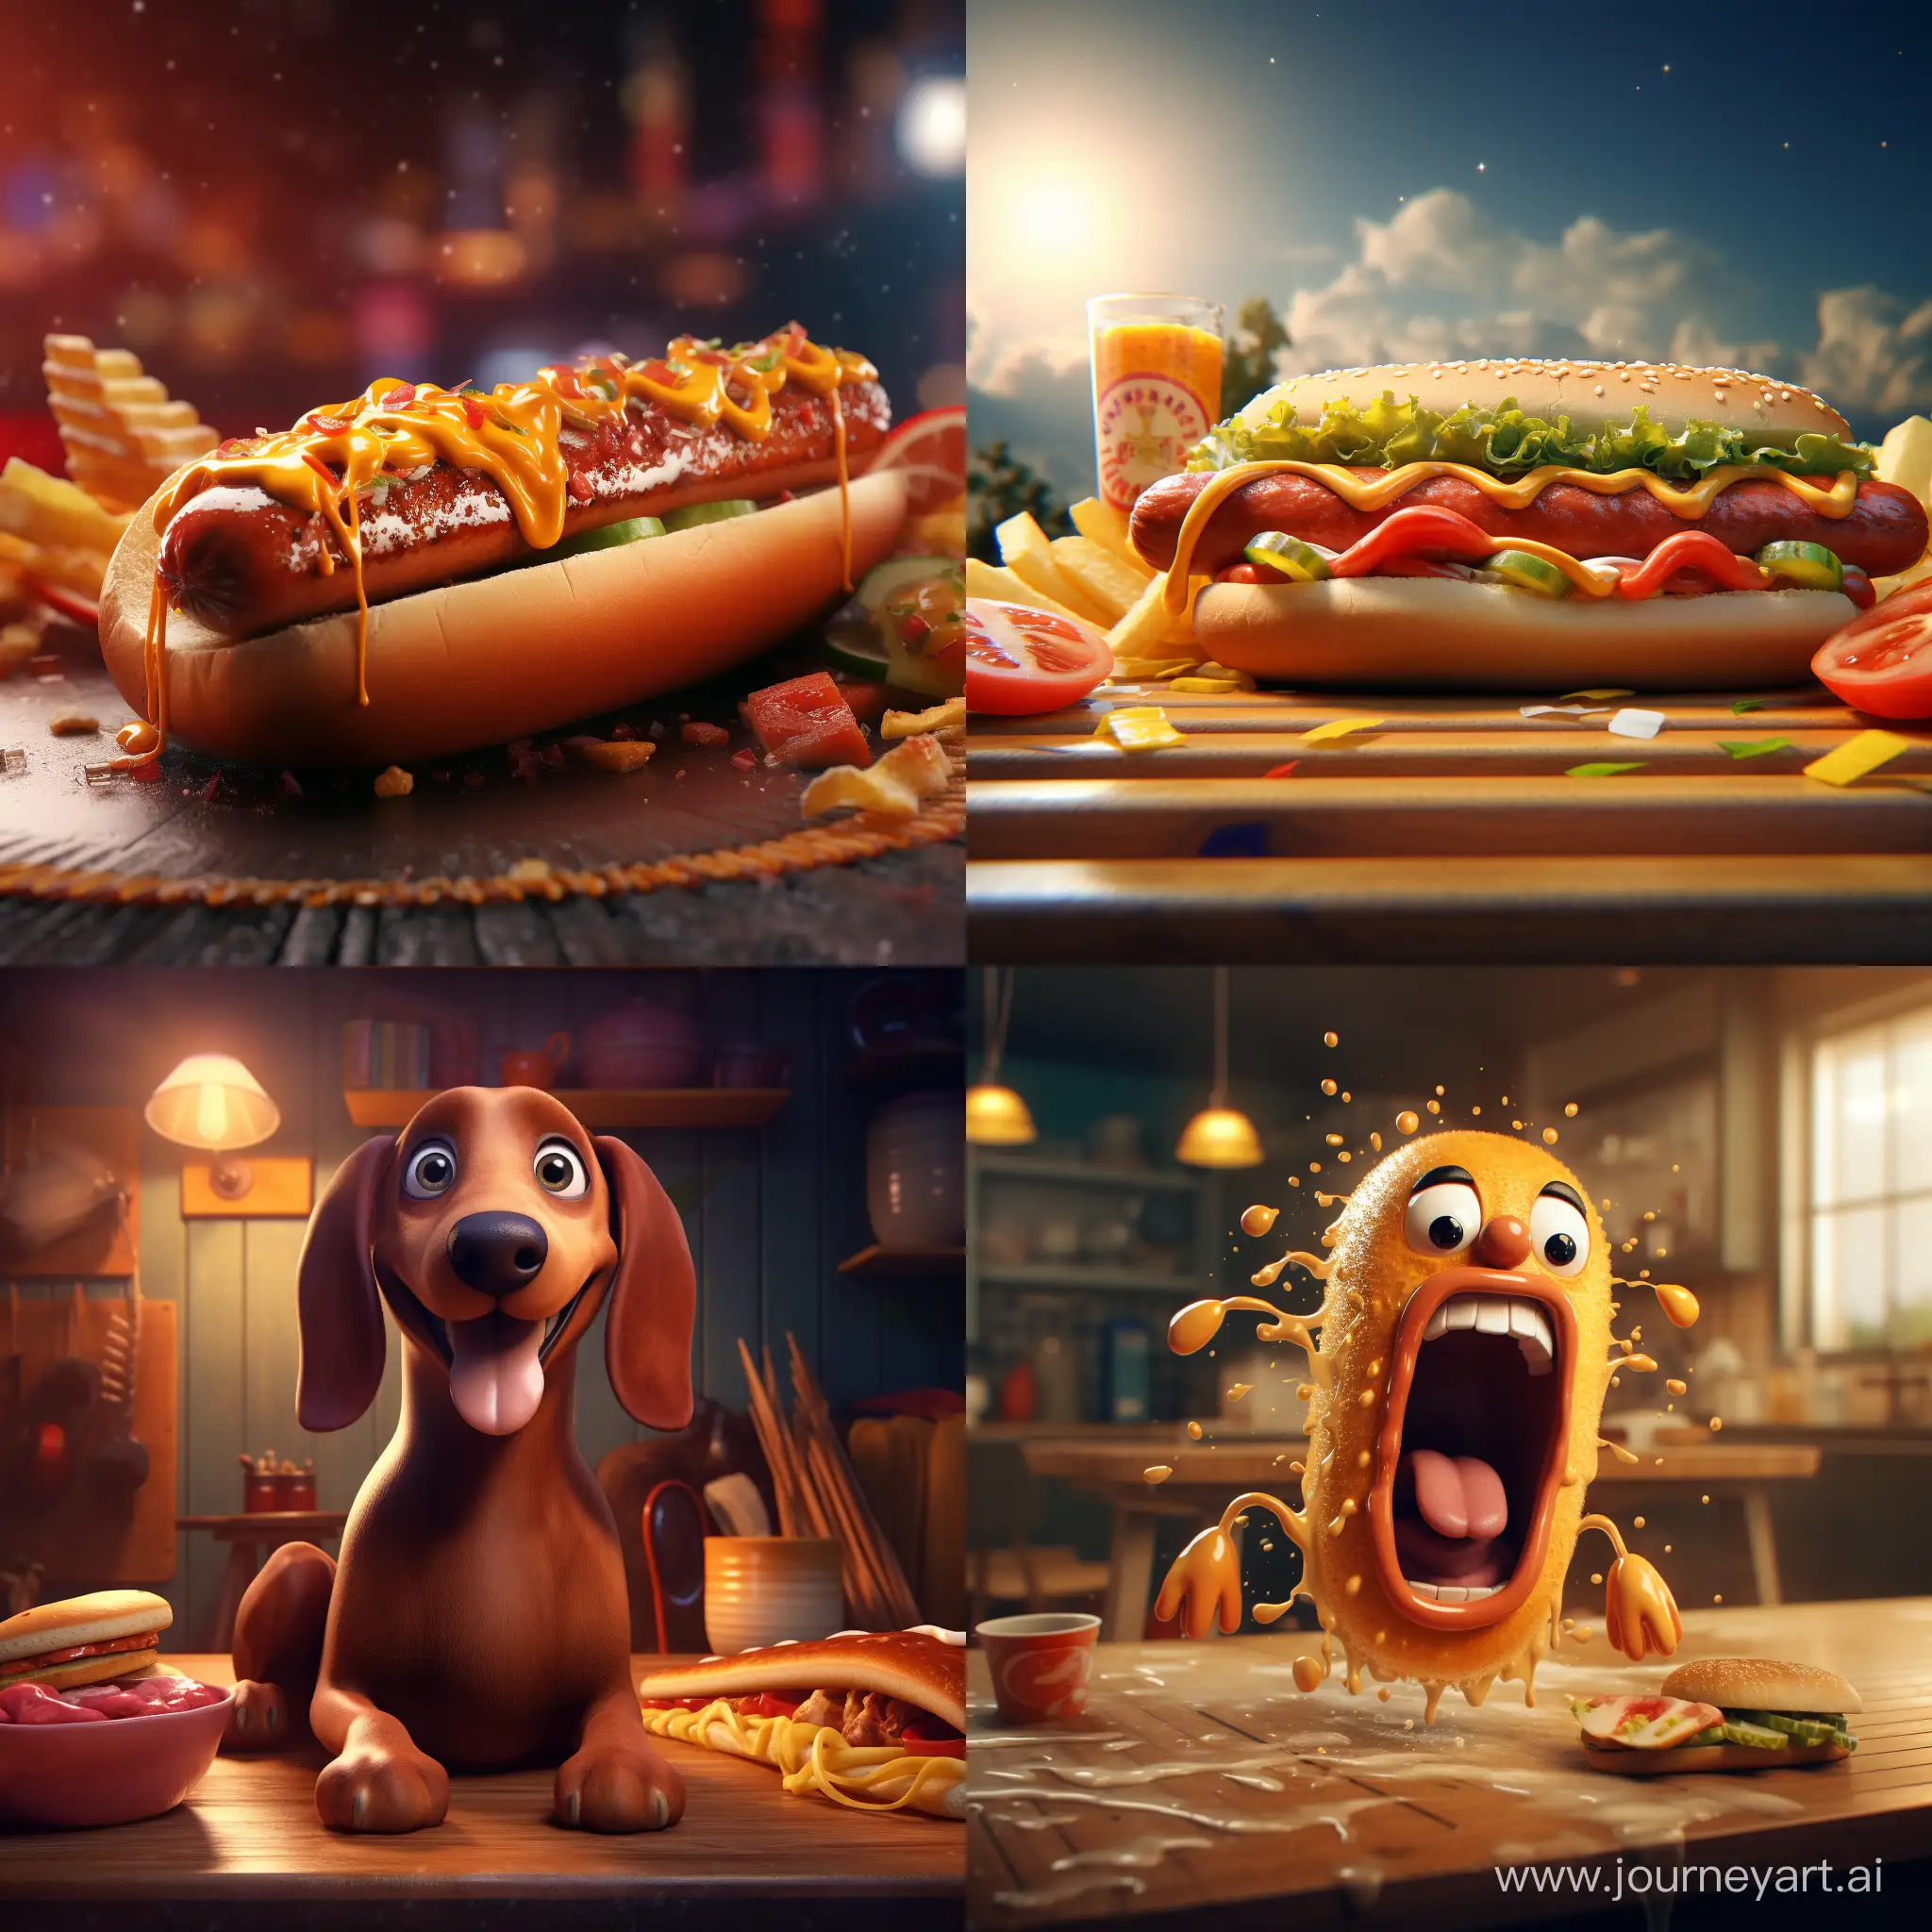 Vibrant-3D-Animation-of-Hot-Dog-Delight